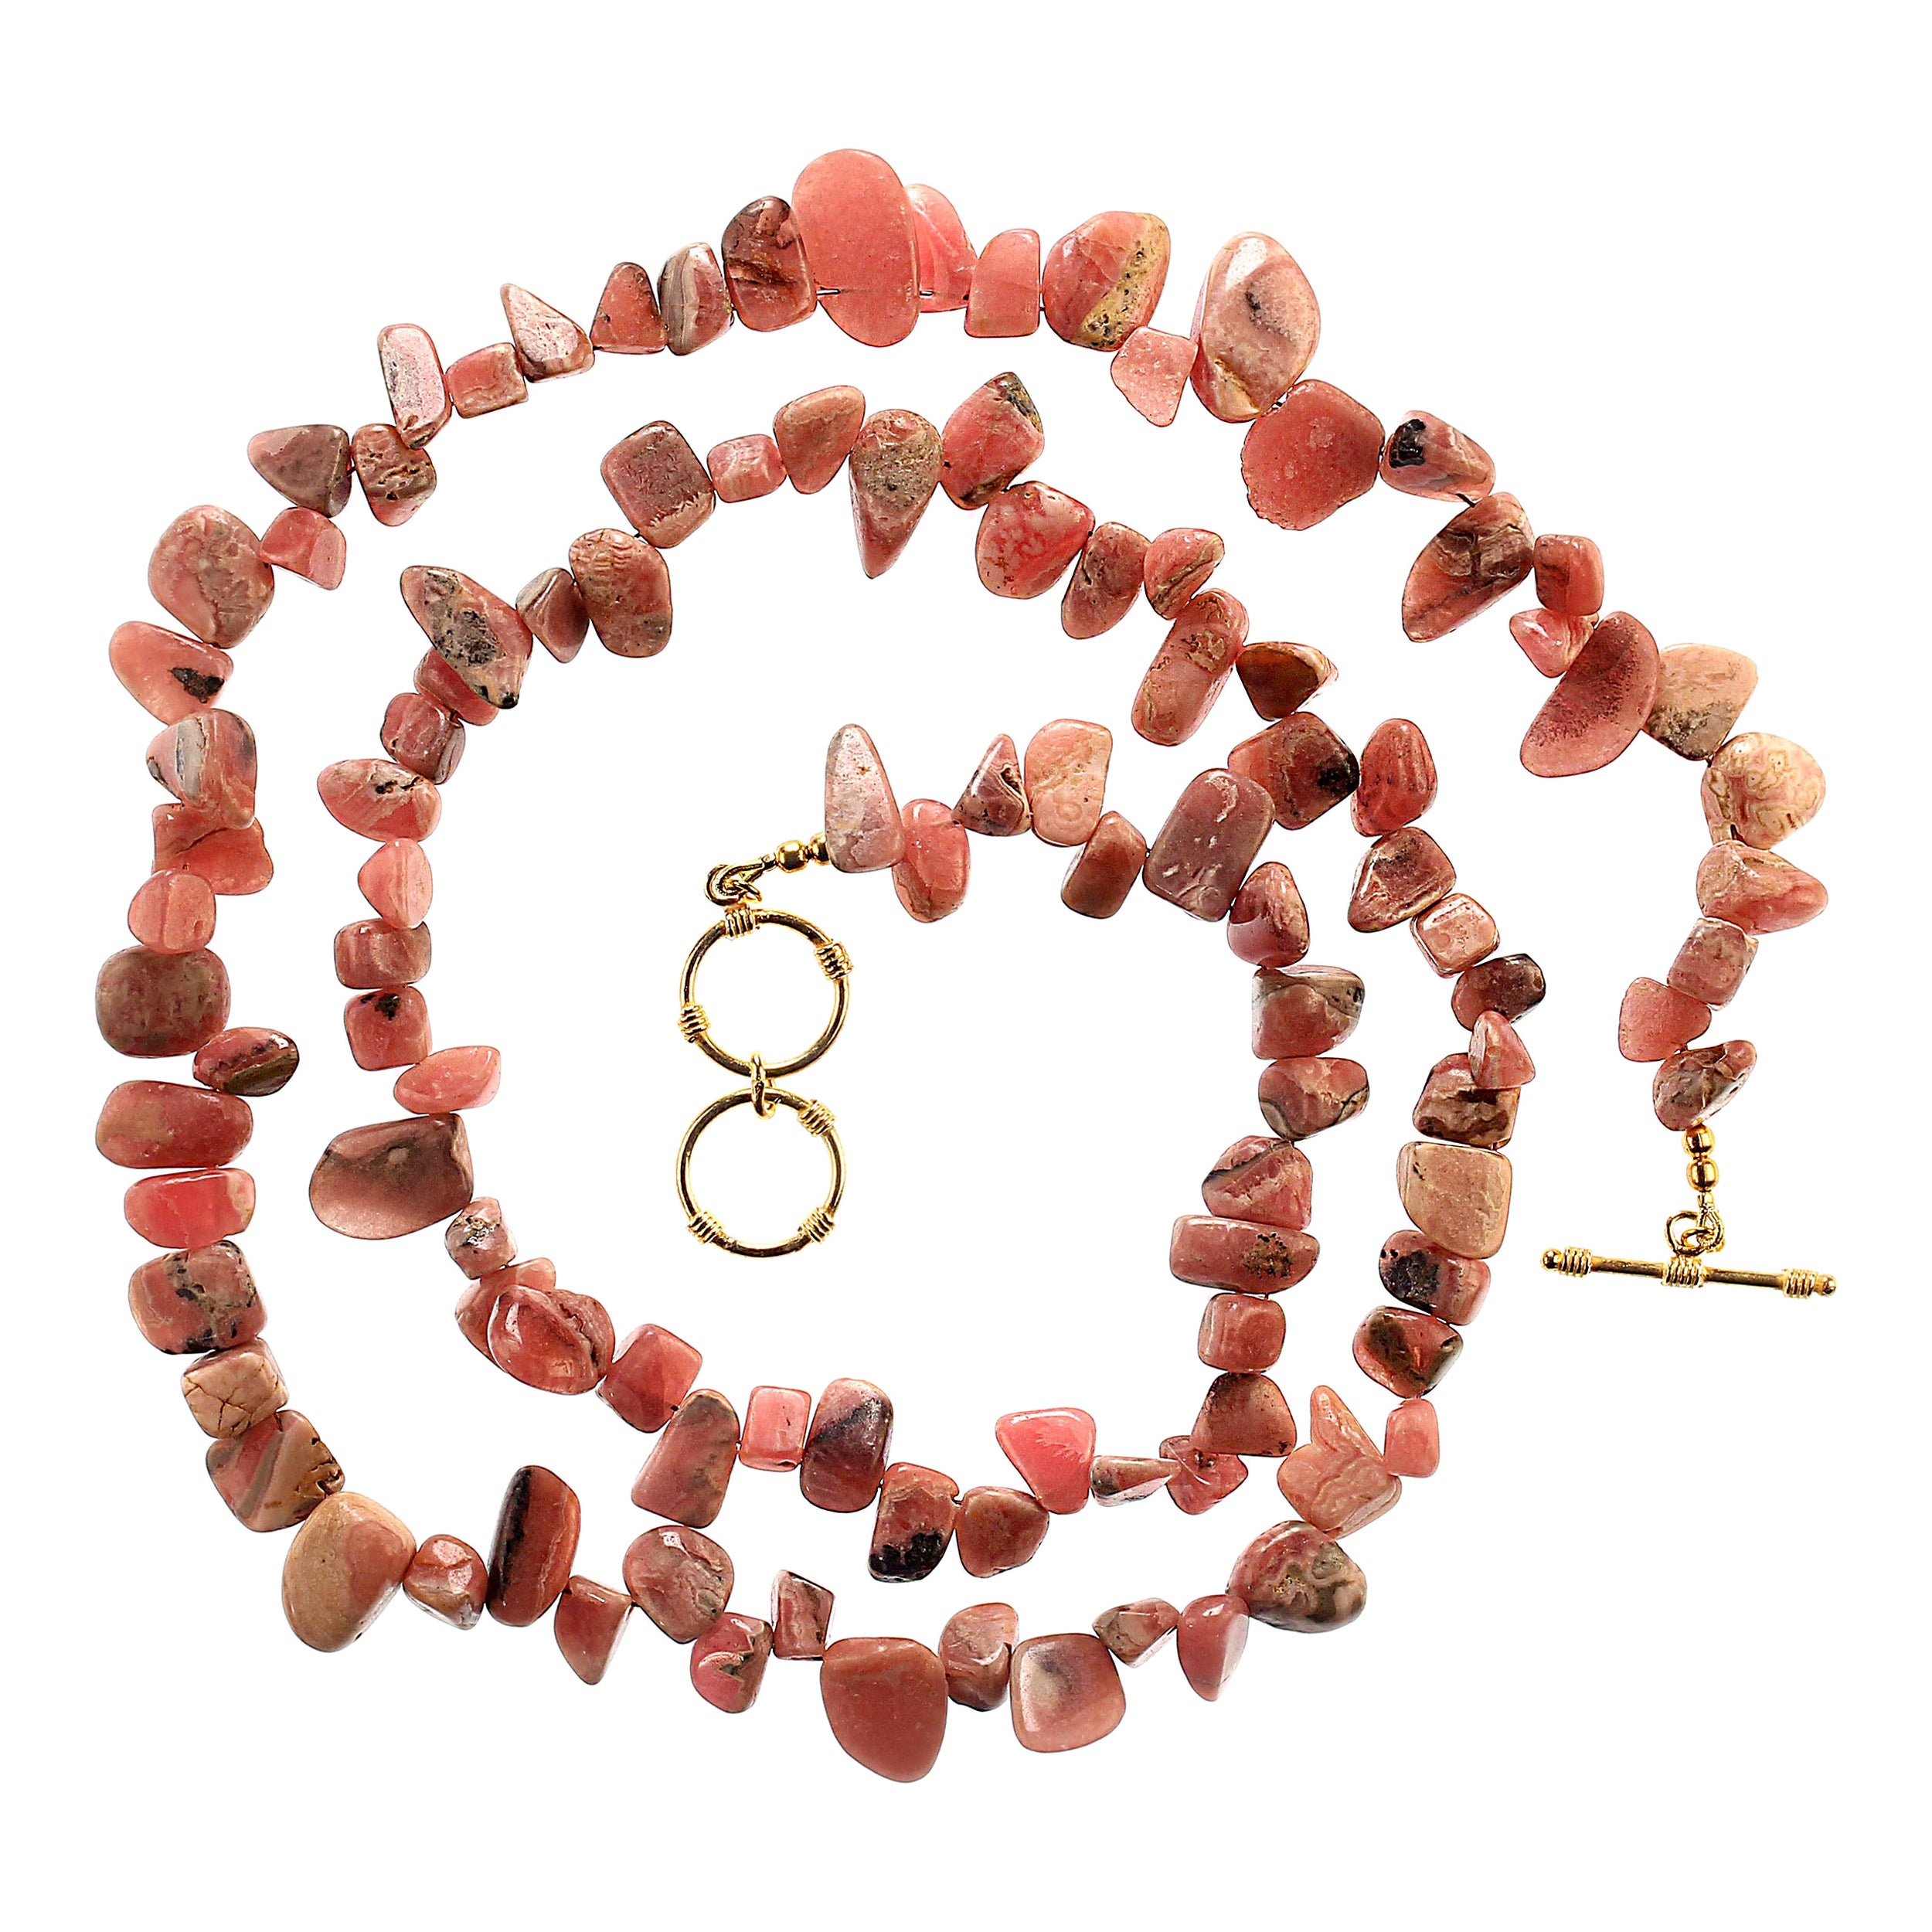 31-inch necklace of rhodochrosite highly polished nuggets.  These gorgeous nuggets vary in size from 5x5mm to 17x7mm.  They show lovely color and striations in color.  At 31 inches the necklace can often be wrapped twice.  It is secured with a goldy